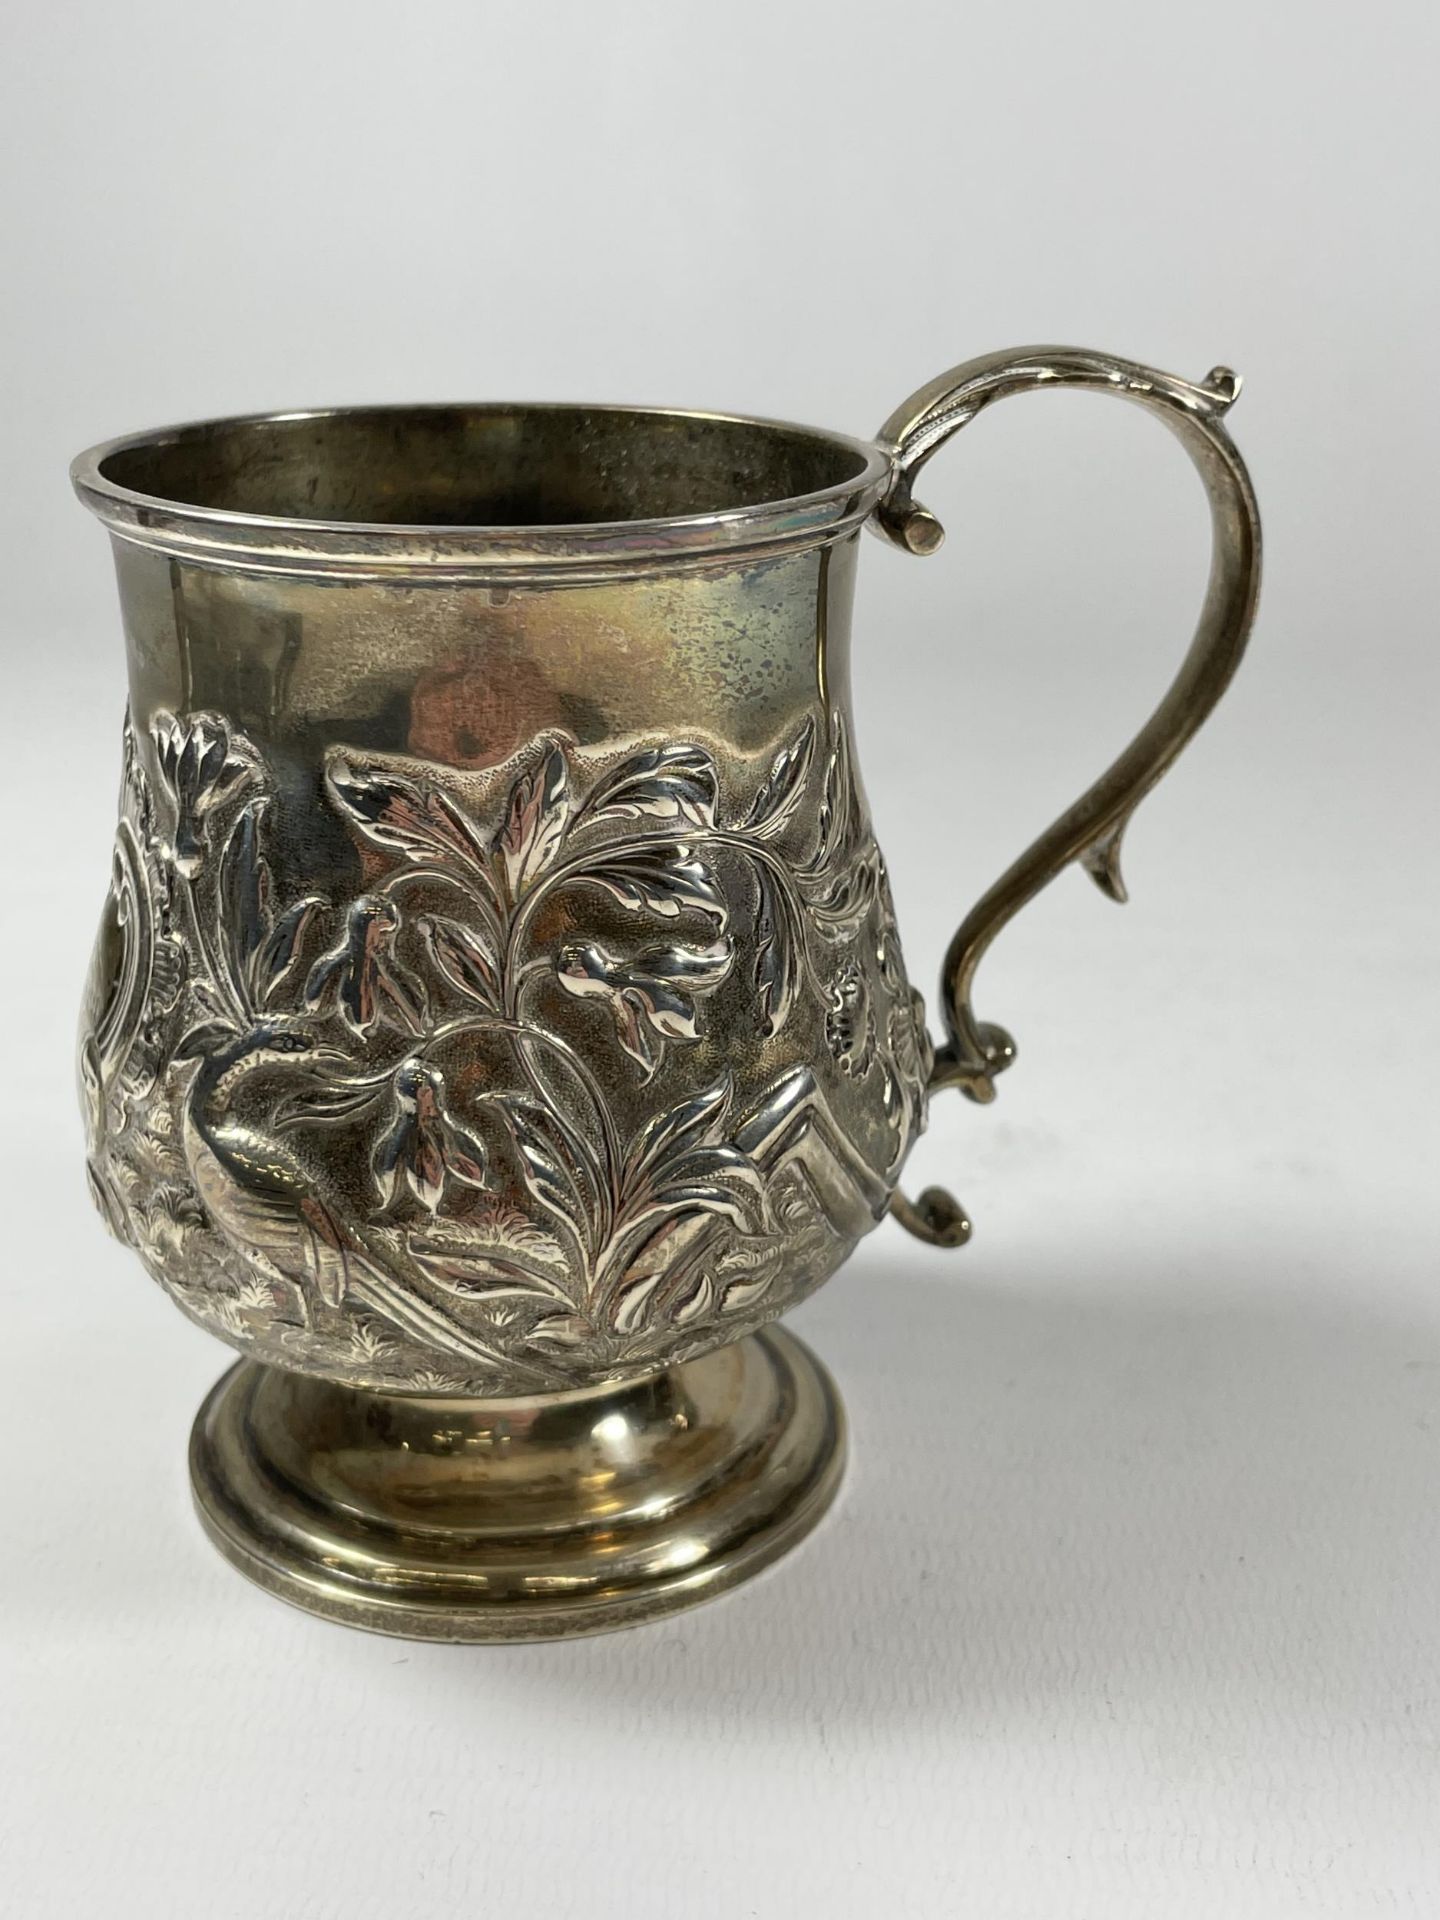 A GEORGE IV SILVER CHRISTENING MUG, HALLMARKS FOR LONDON 1830, MAKERS MARK 'E.H', HEIGHT 10CM, - Image 2 of 3